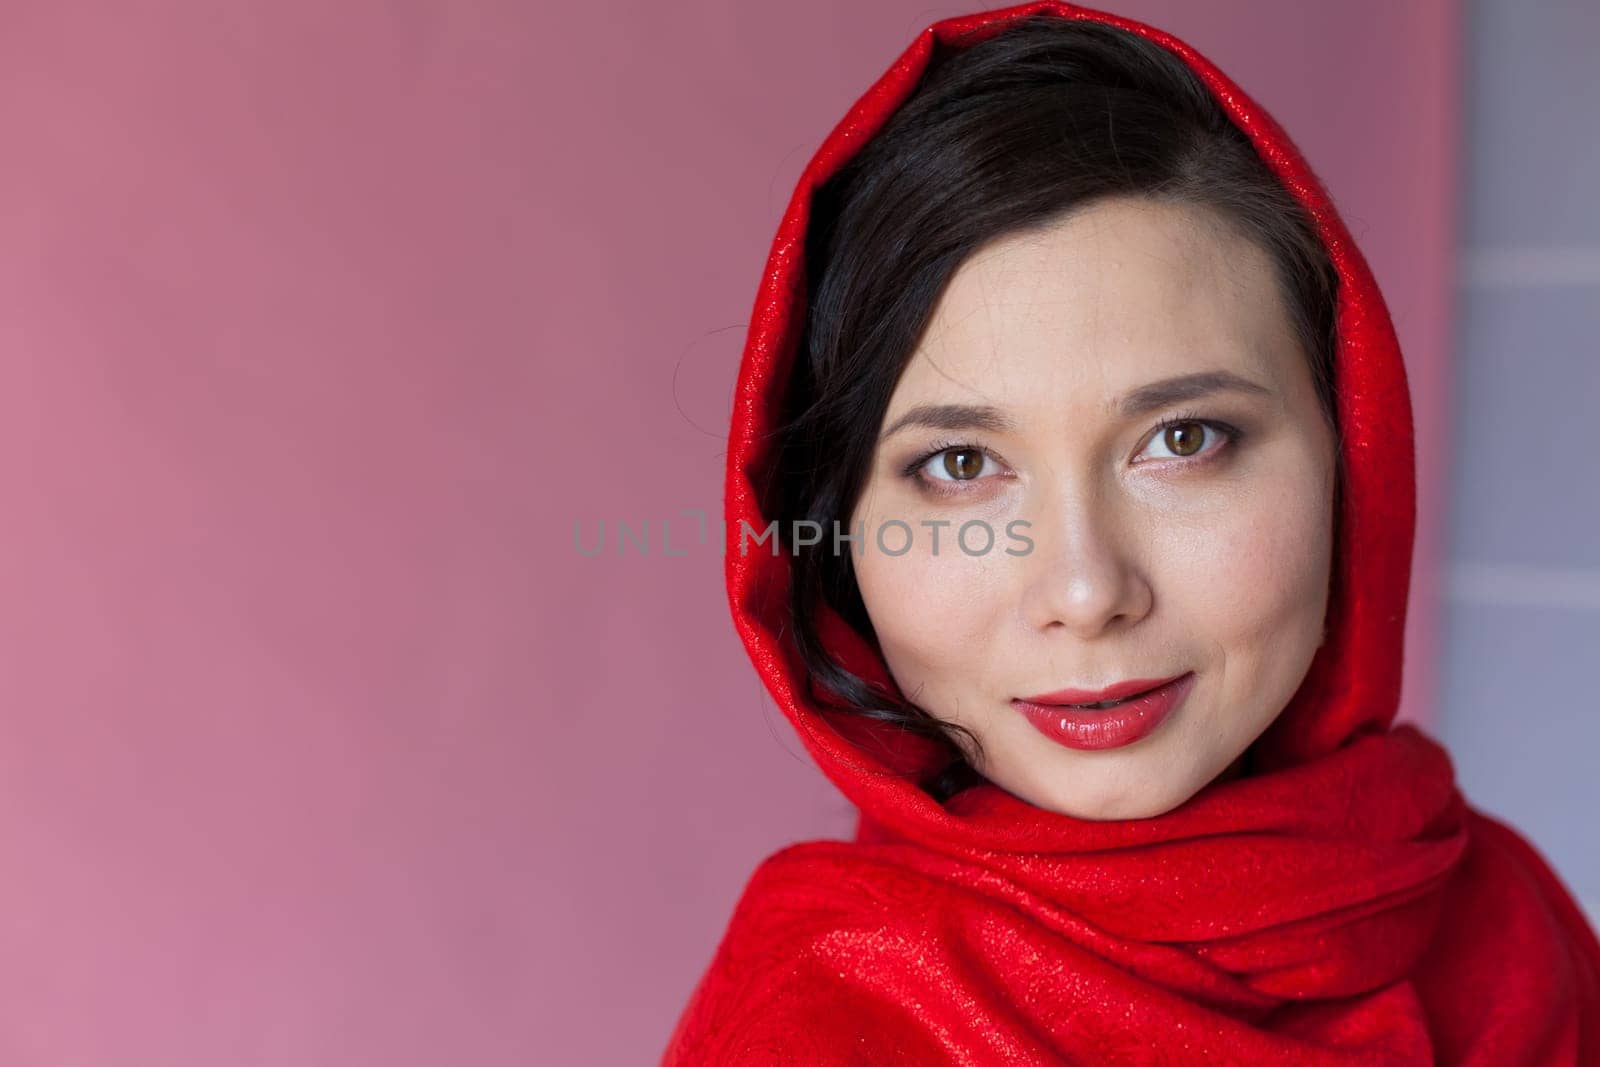 Portrait of a beautiful Asian woman with a red headscarf on her head by Simakov